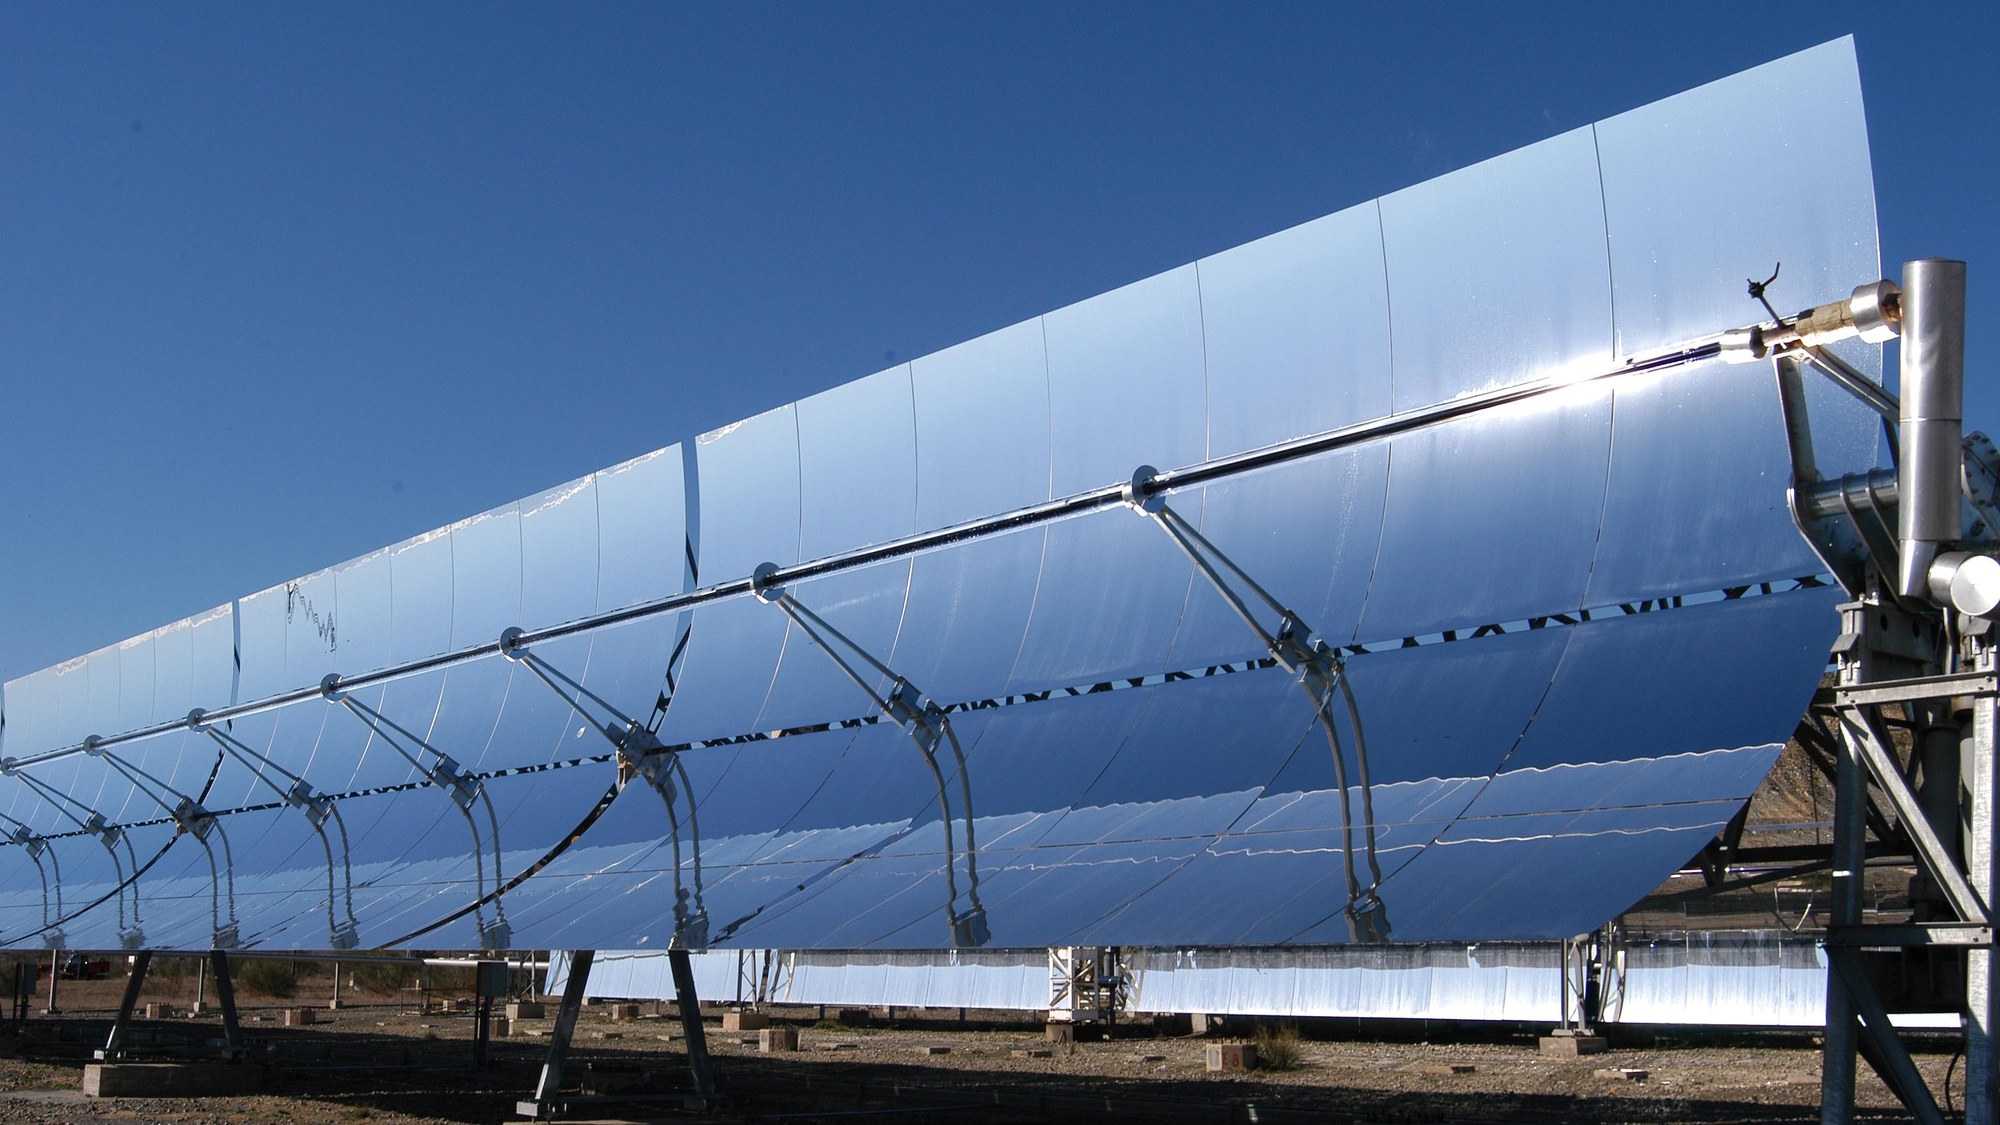 Using the Sun – parabolic trough power plant in Almería, southern Spain